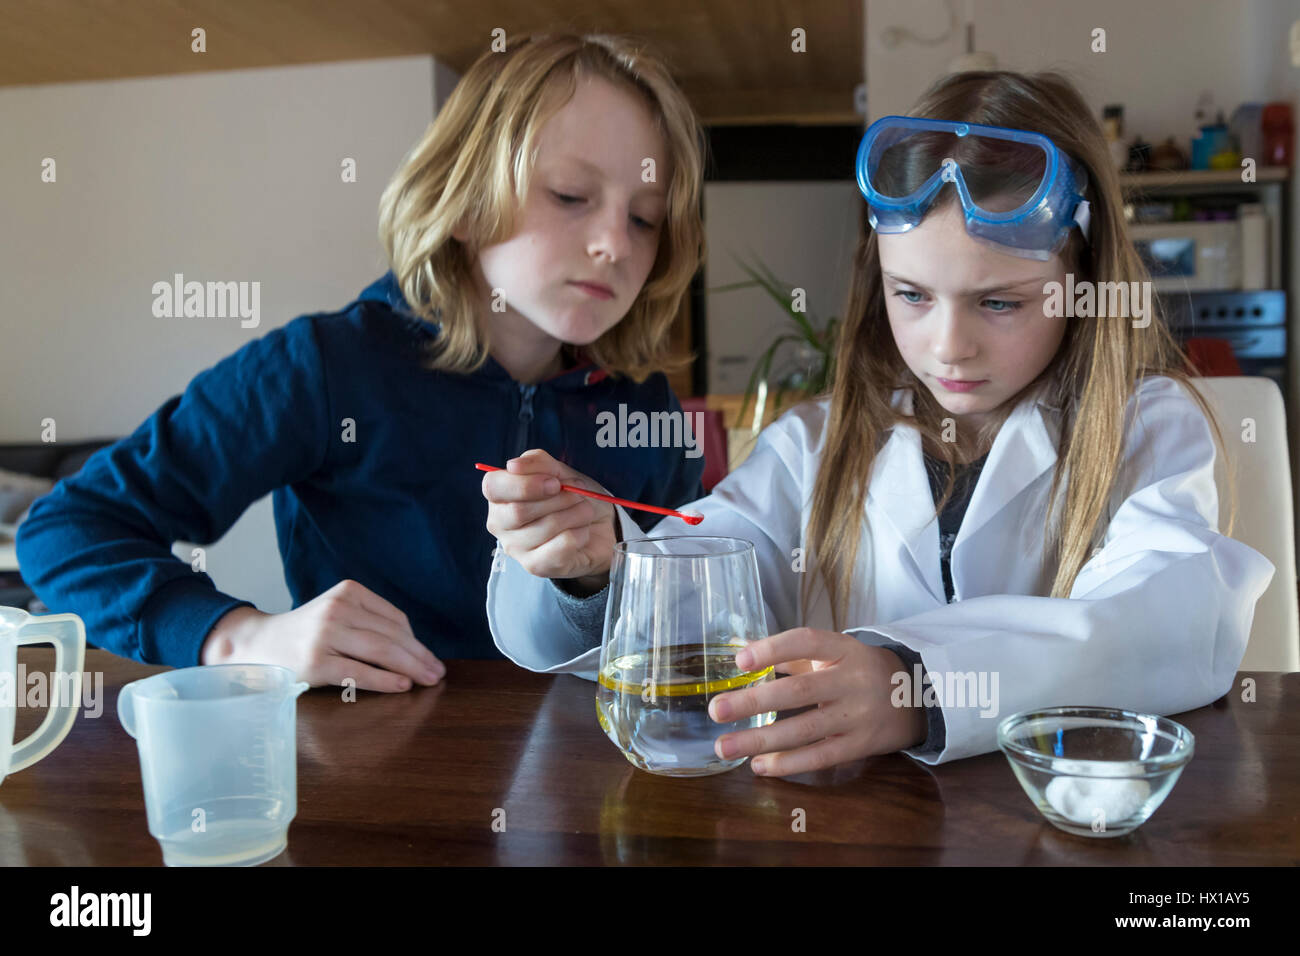 Two children using chemistry set at home Stock Photo